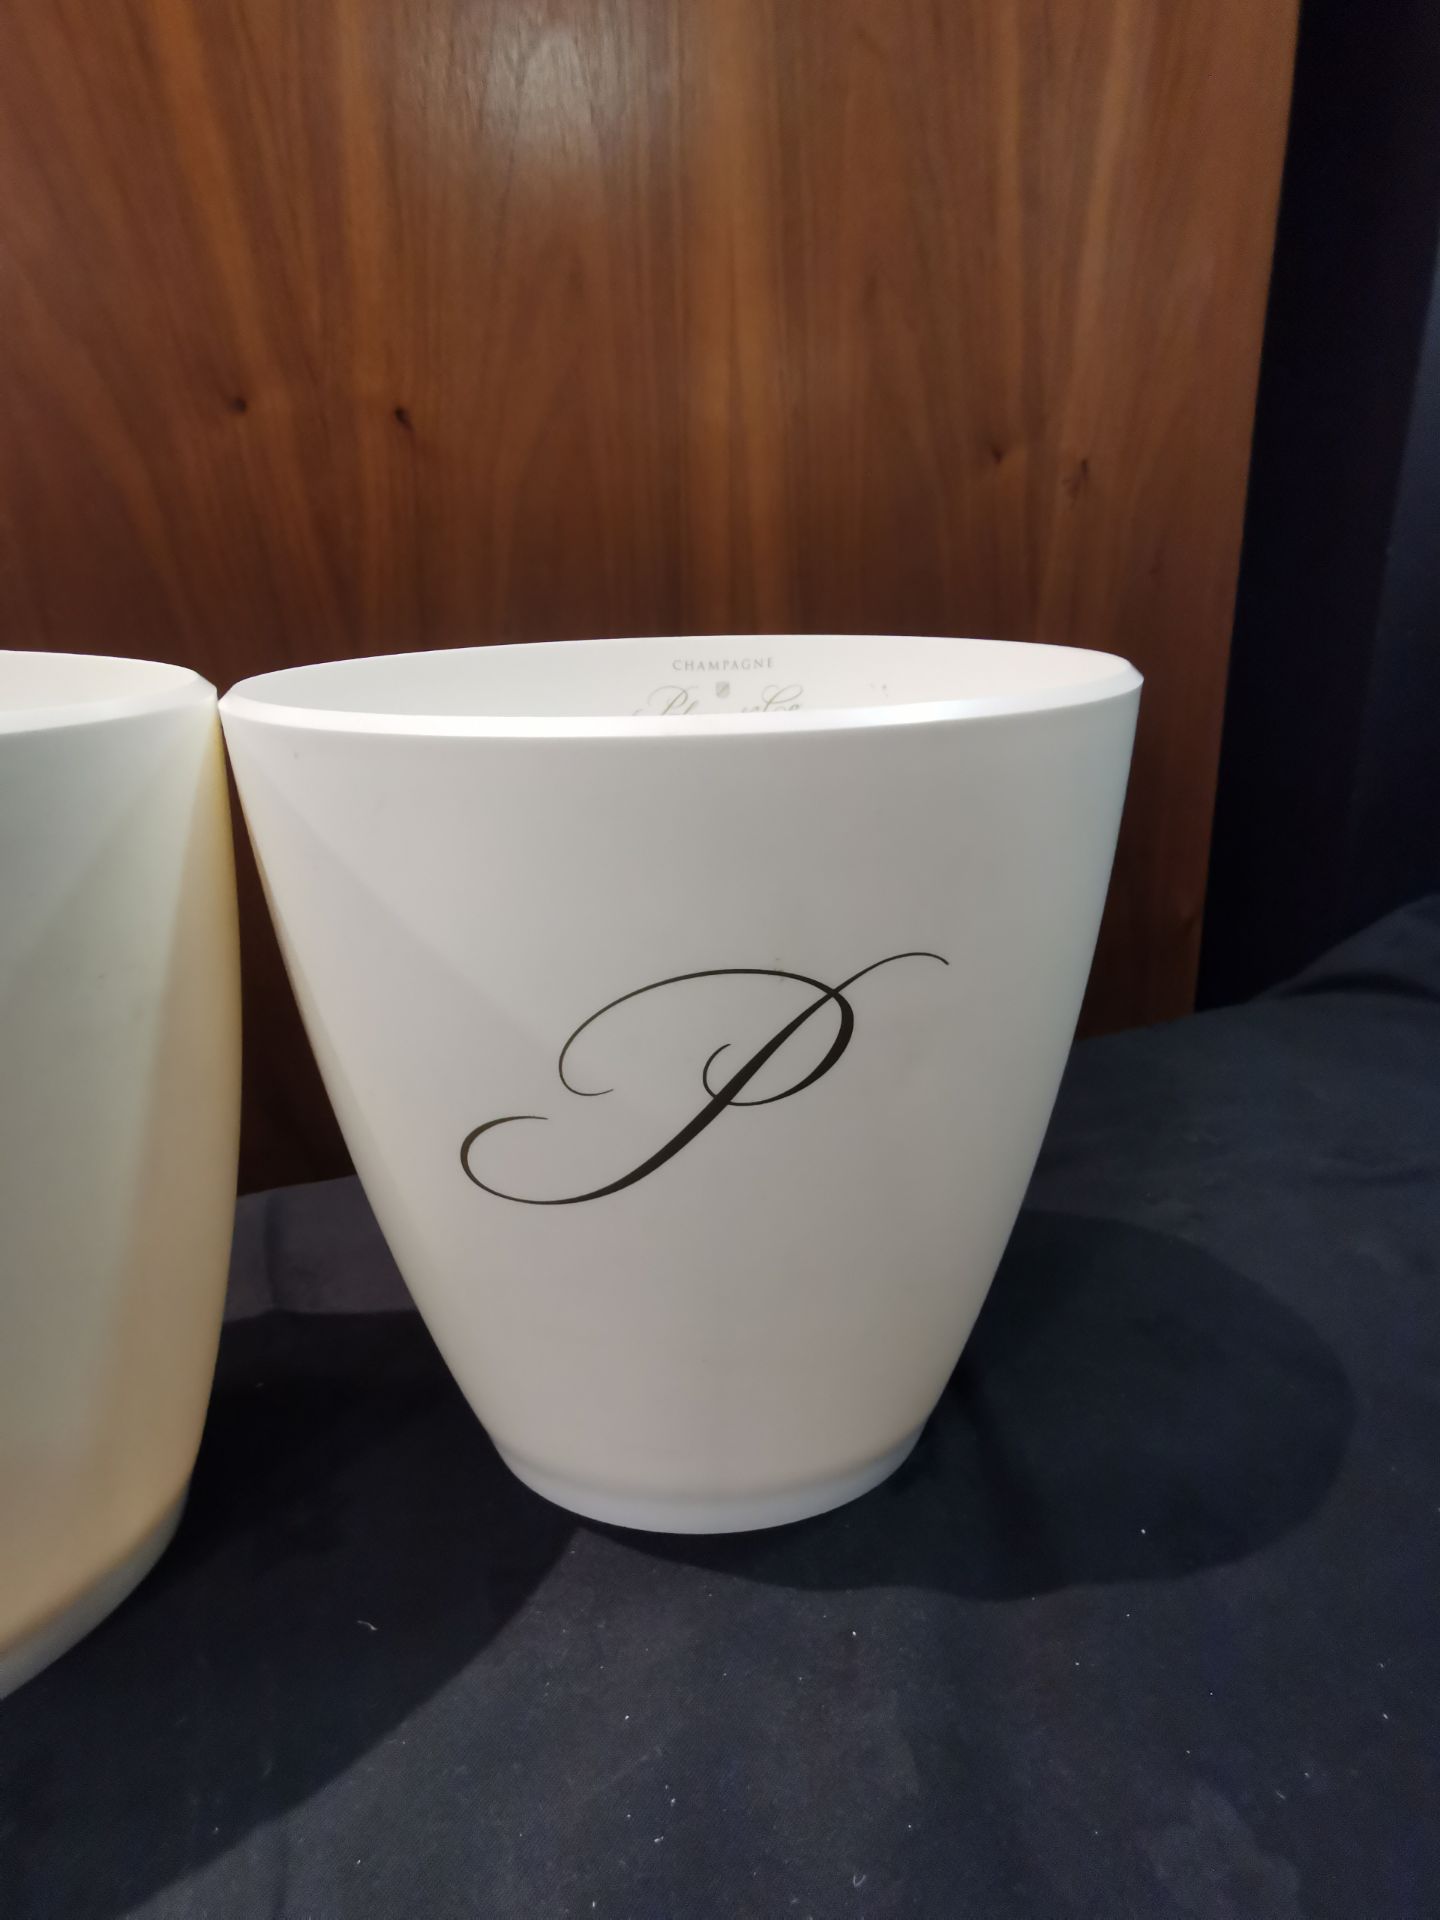 2 x Palmers & Co Champagne Ice Buckets - Image 2 of 4